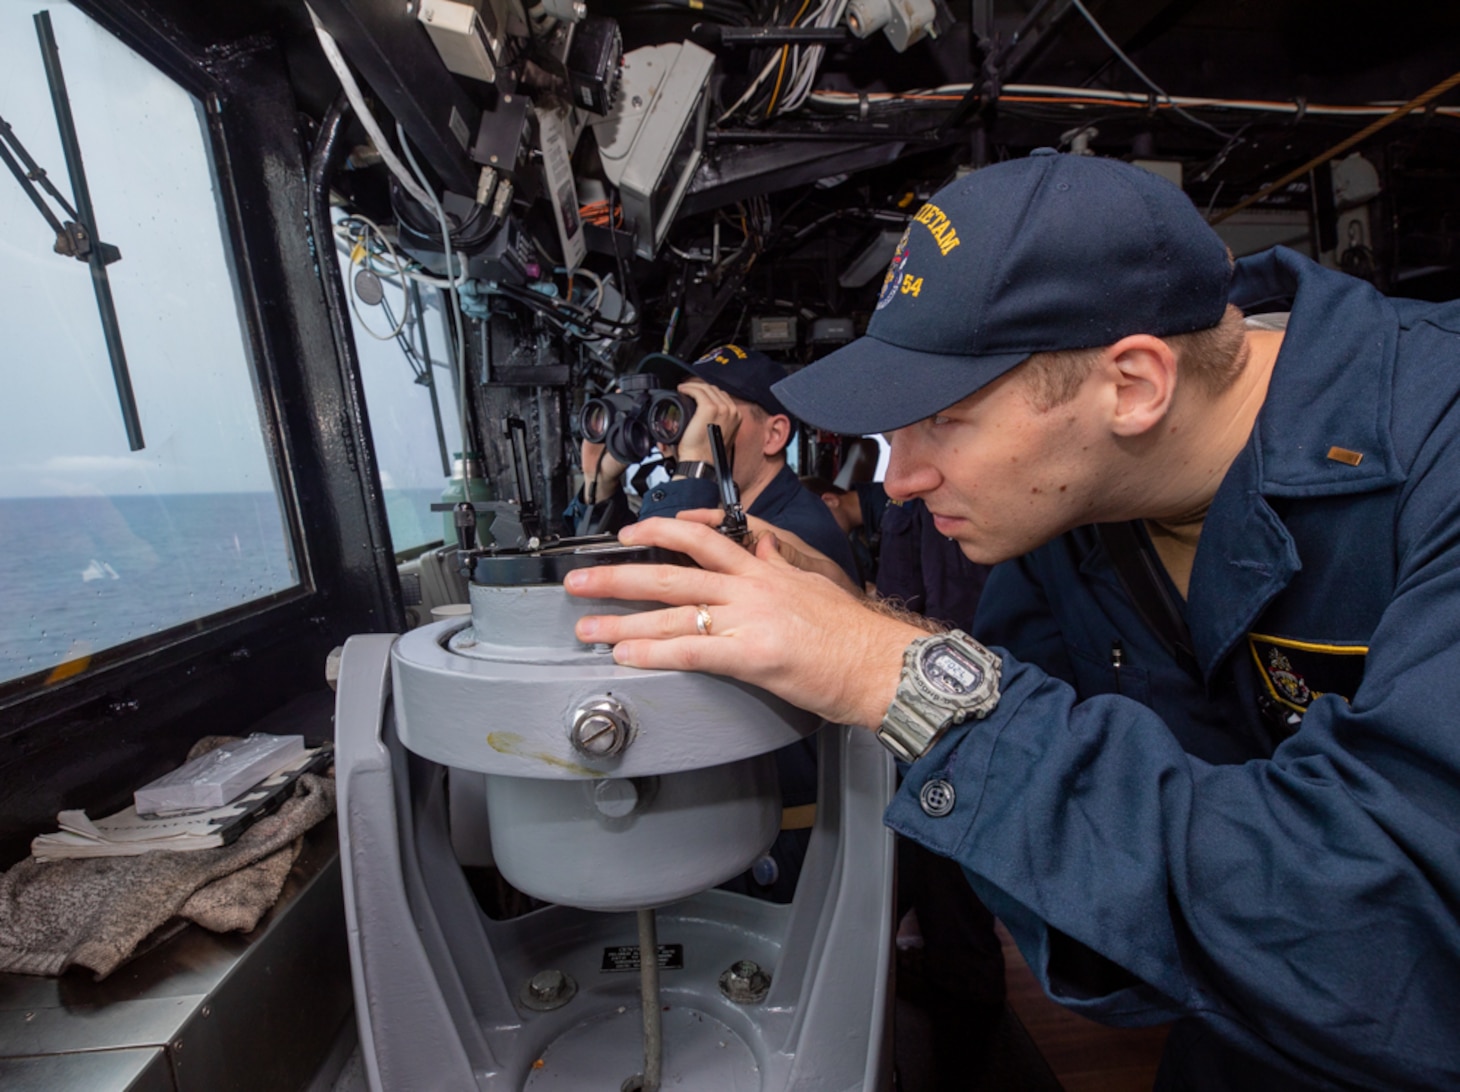 TAIWAN STRAIT (AUG 28, 2022) Ensign Minor Wetzel, from La Canada, California, right, takes ship bearing as Ensign Patrick Brady, from Dephaven, Minnesota, searches for surface contacts in the bridge as Ticonderoga-class guided-missile cruiser USS Antietam (CG 54) conducts routine Taiwan Strait Transit. Antietam is deployed to 7th Fleet area of operations in support of a free and open Indo-Pacific. (U.S. Navy photo by Mass Communication Specialist 3rd Class Santiago Navarro)